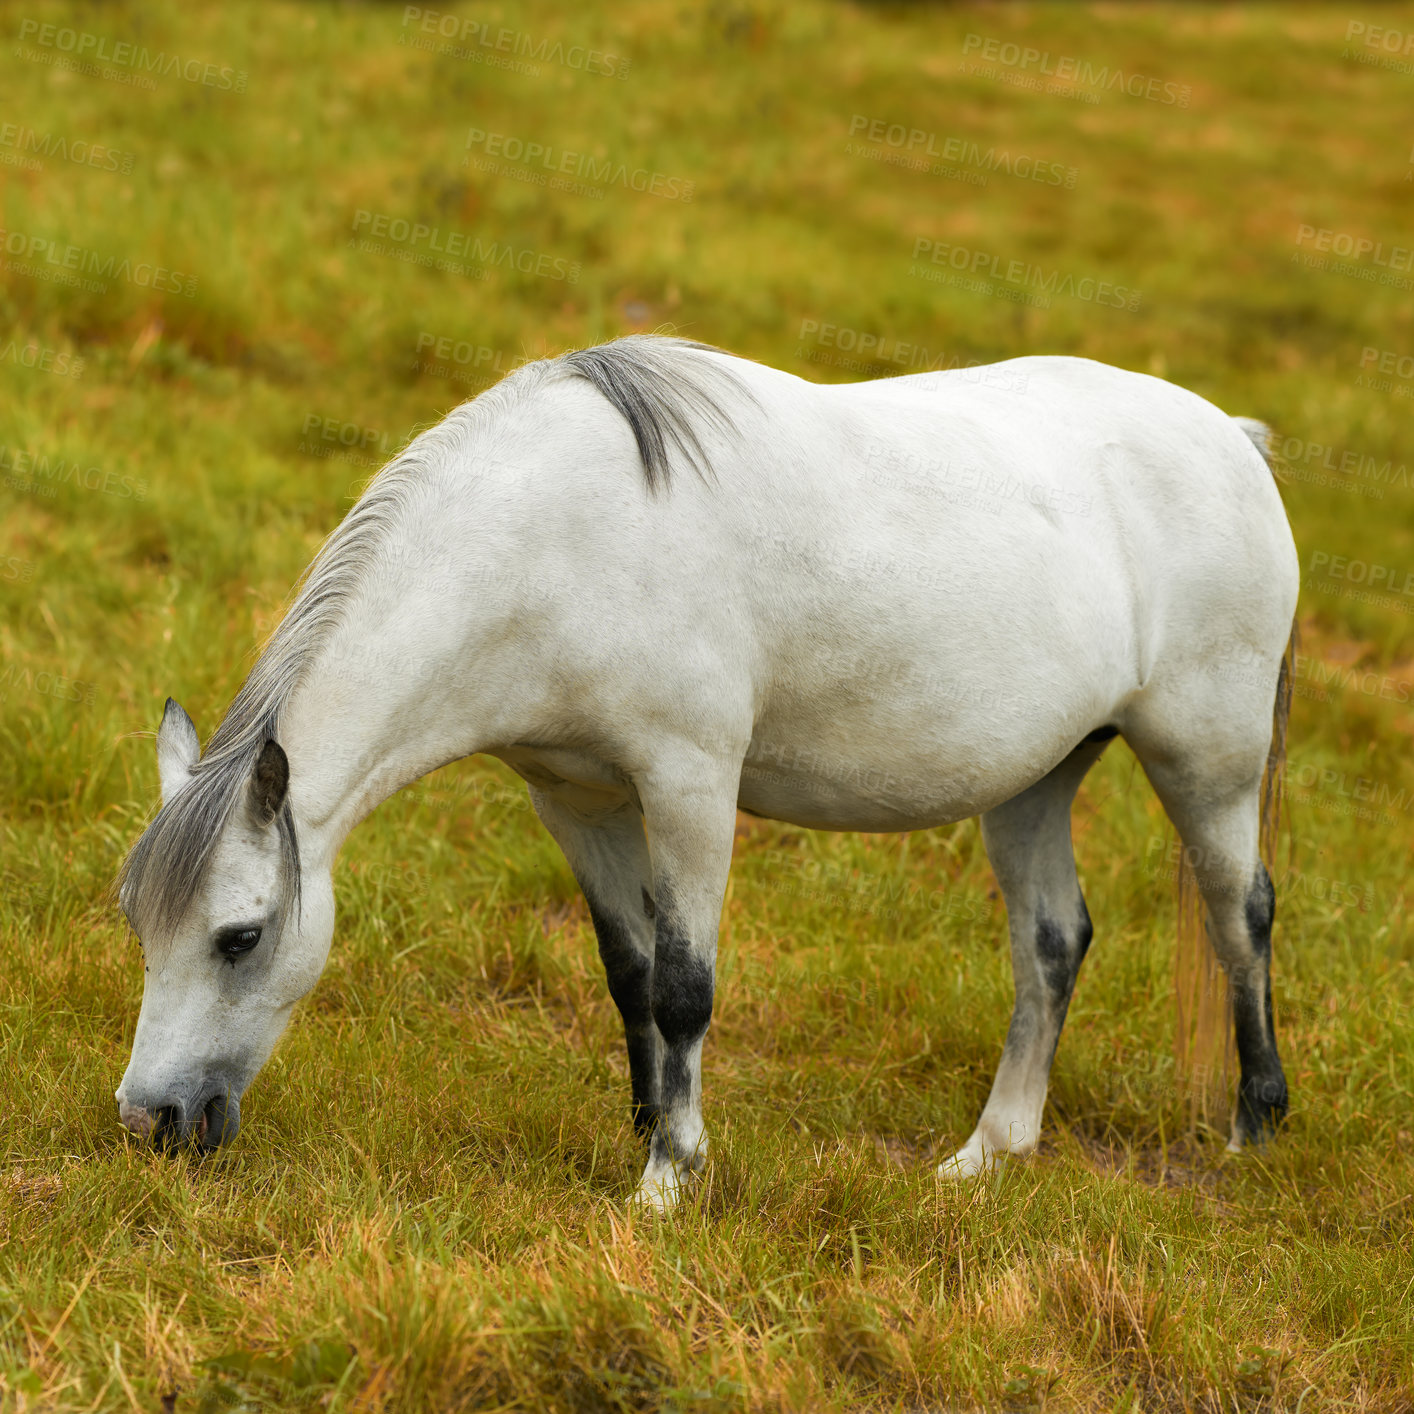 Buy stock photo One white horse grazing on a field alone outside. An animal standing on a green farm land or a pasture on a sunny day. Pony eating on a lush spring landscape. A wild foal feeding on rural farmland